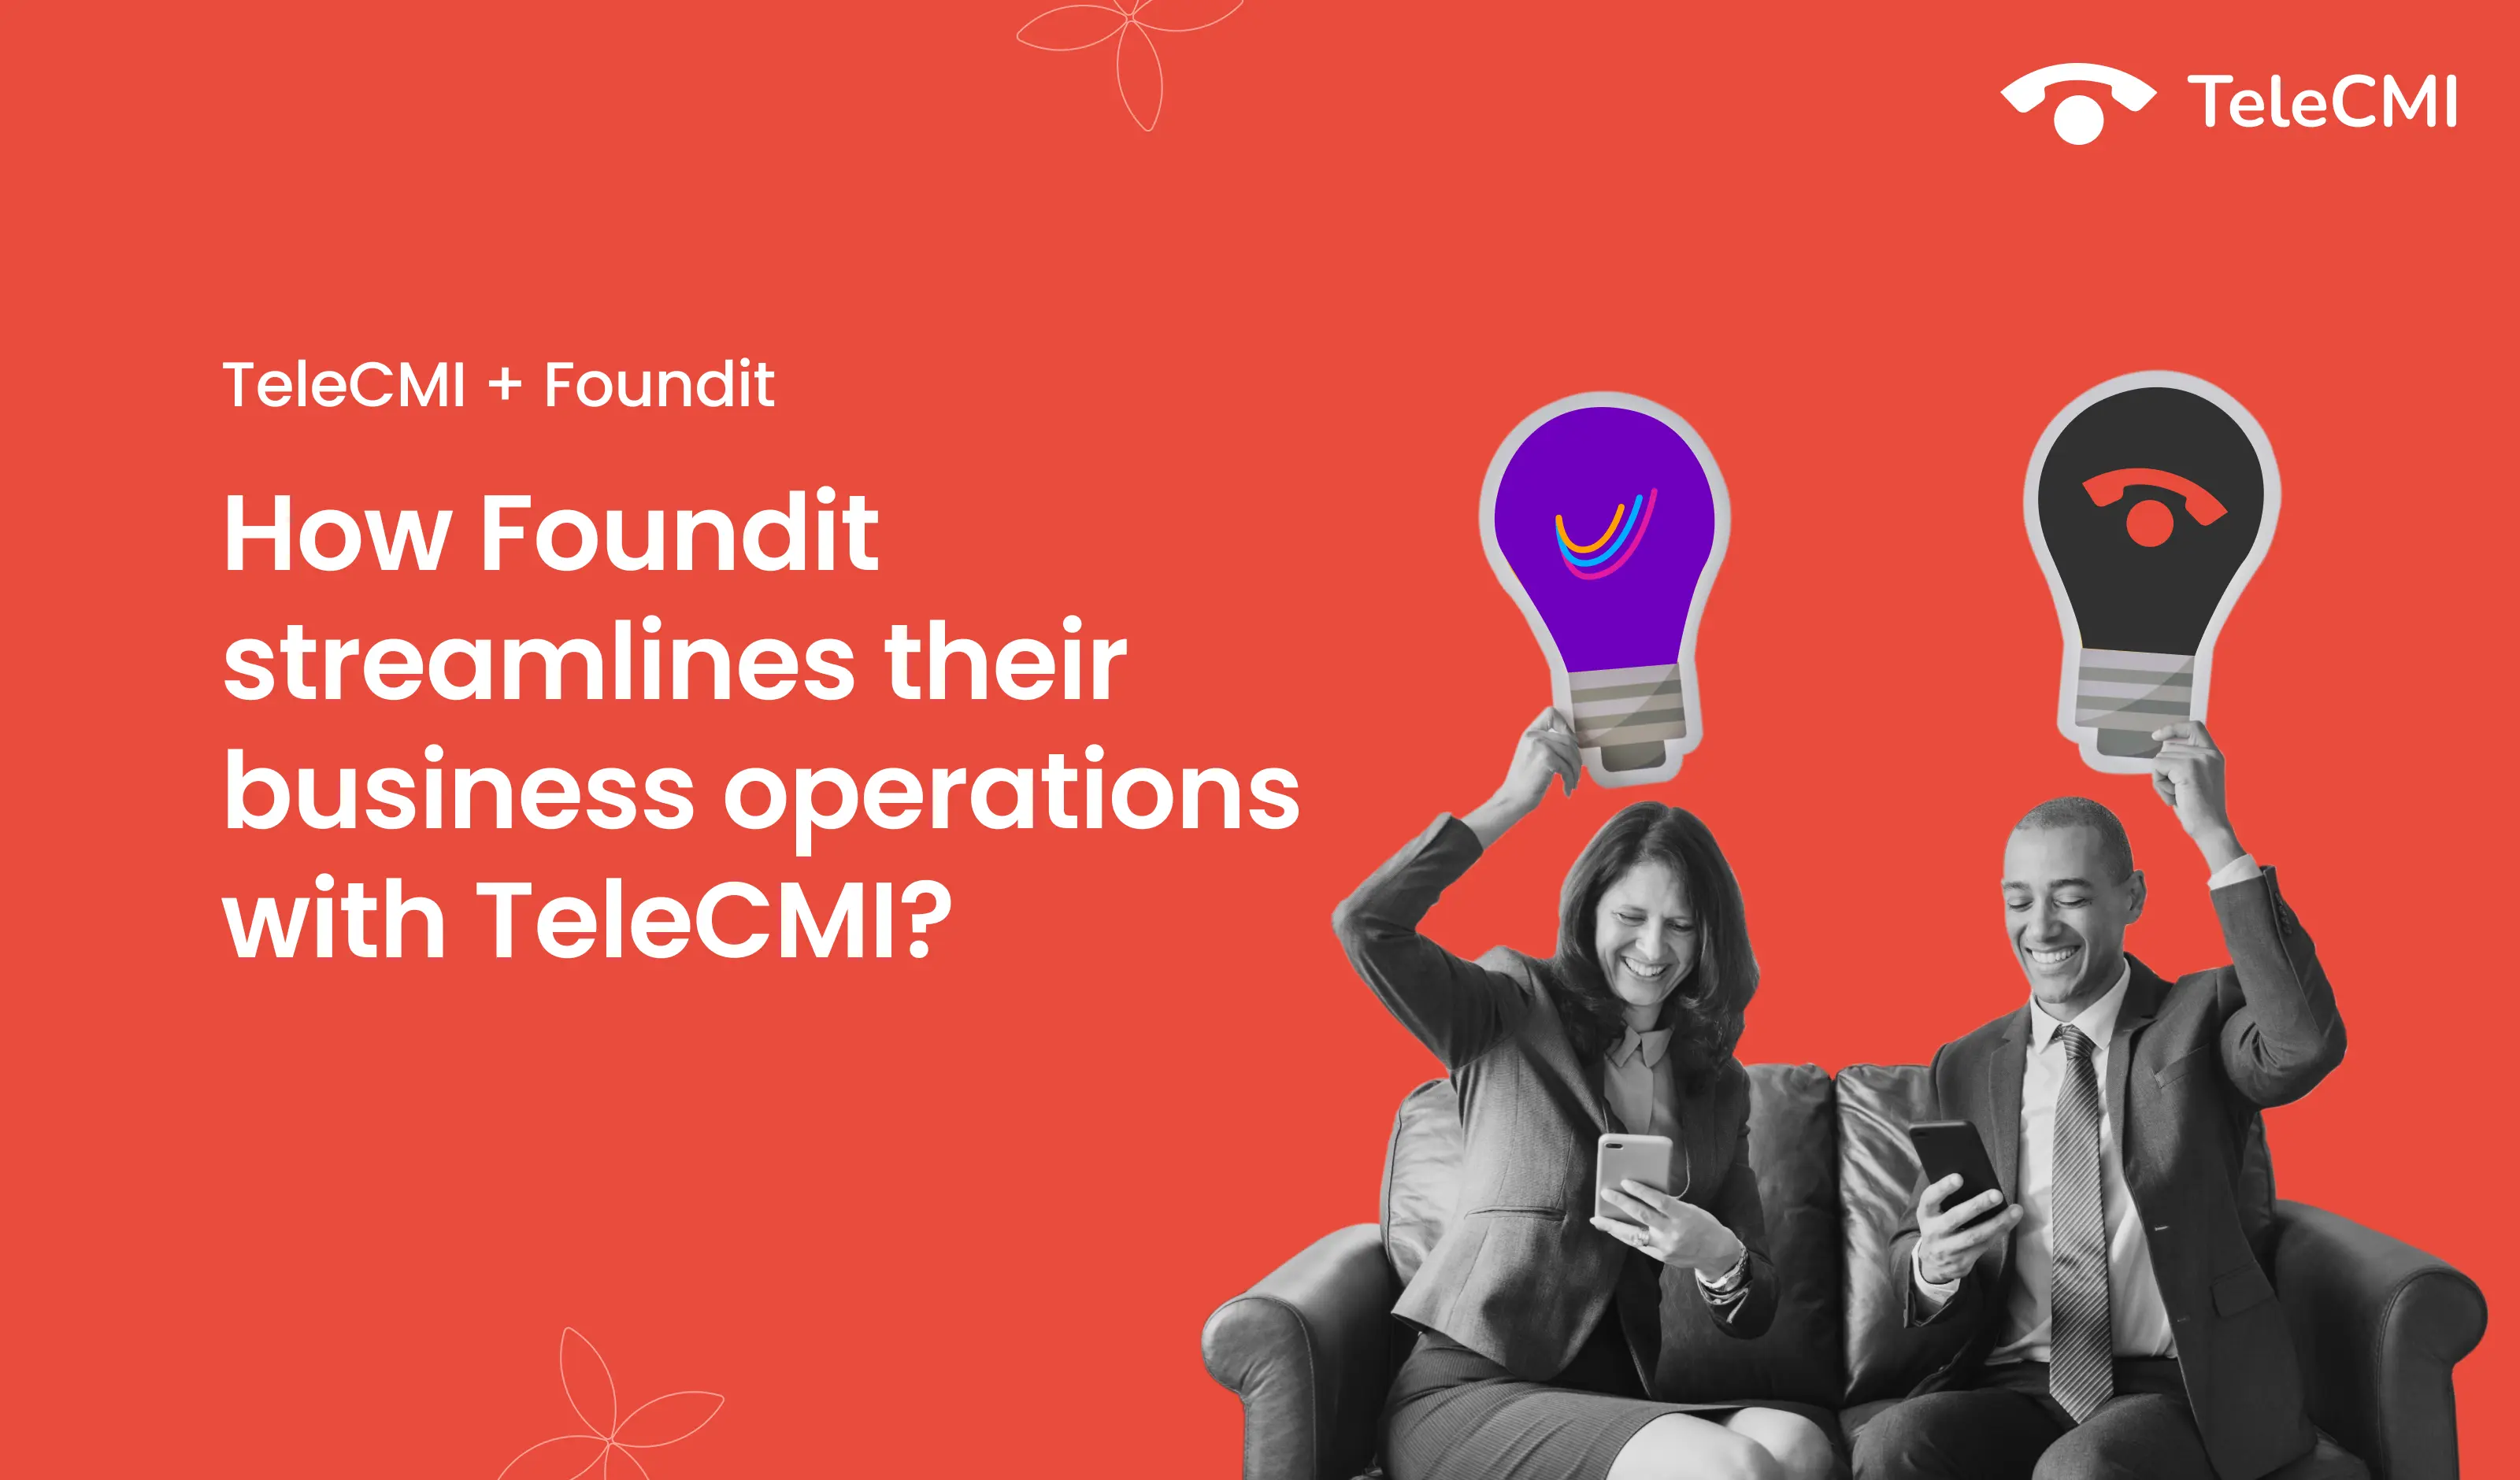 How did Foundit streamline its business
                        operations with TeleCMI?